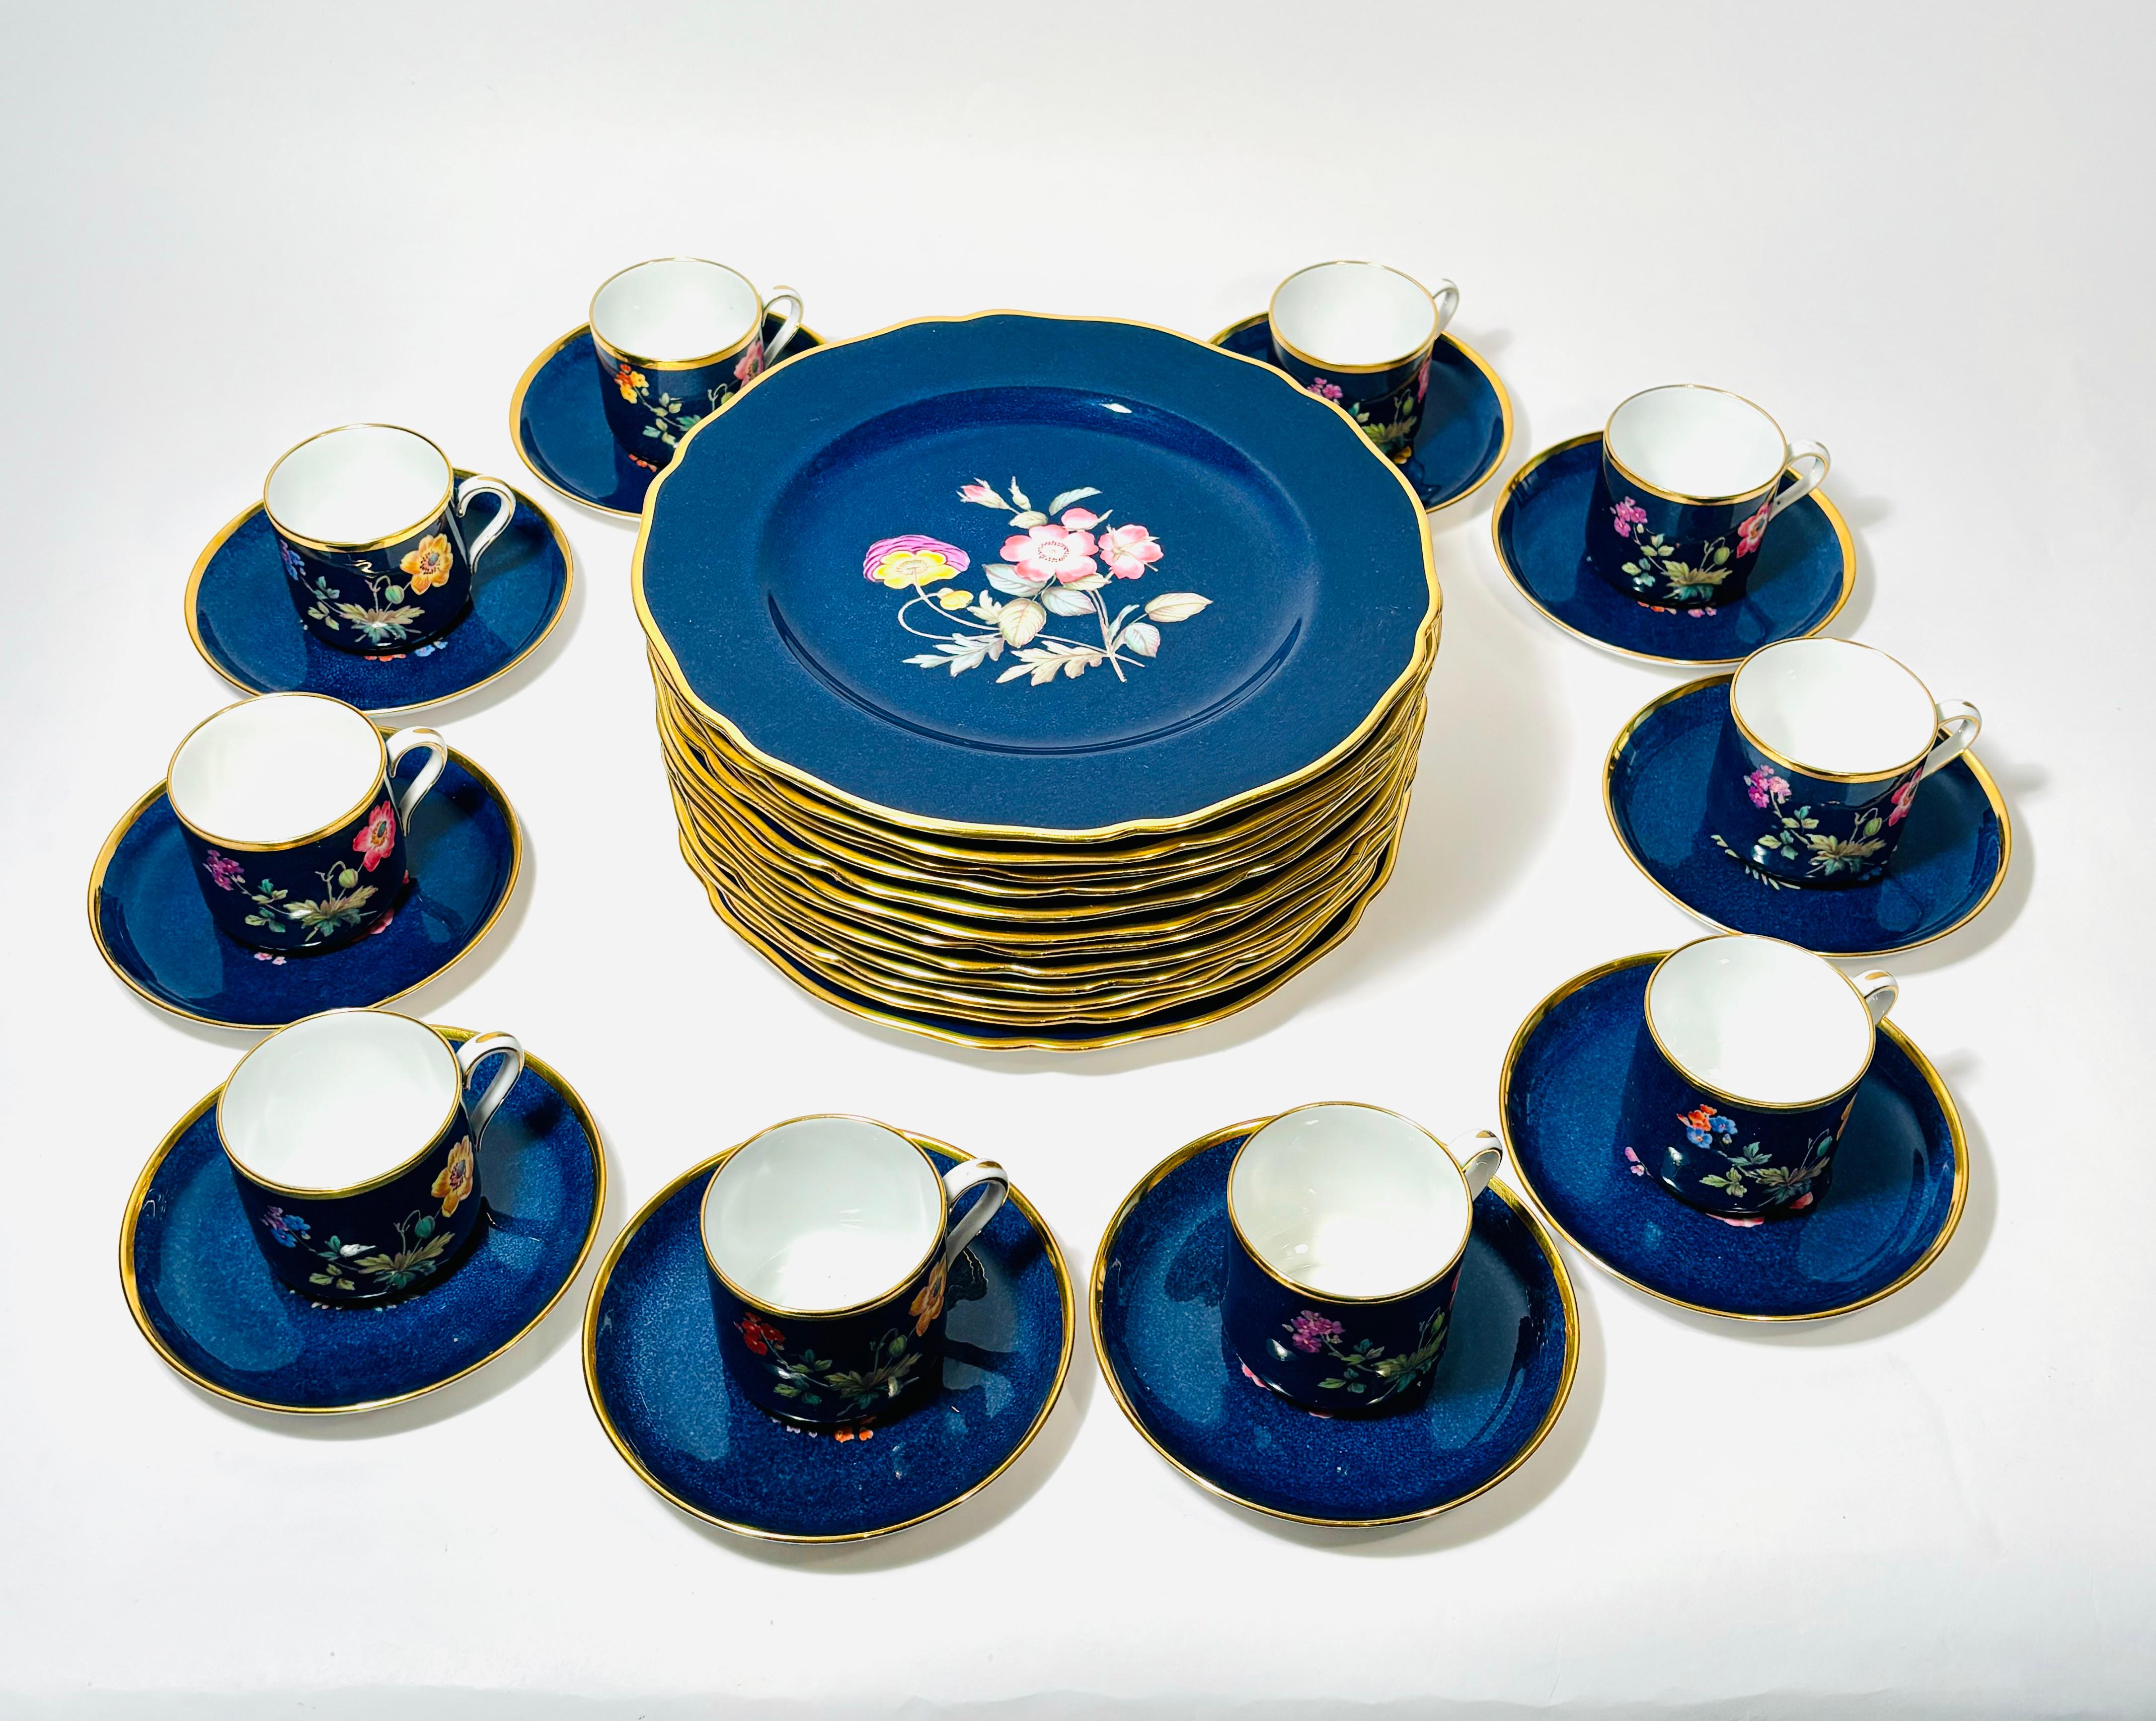 From one of our favorite English firms, Copeland Spode, is this striking set. The rich almost cobalt blue background is textured and inset with vibrant florals. Each one is different and labeled in Latin on the back of the plate. A pretty scallop